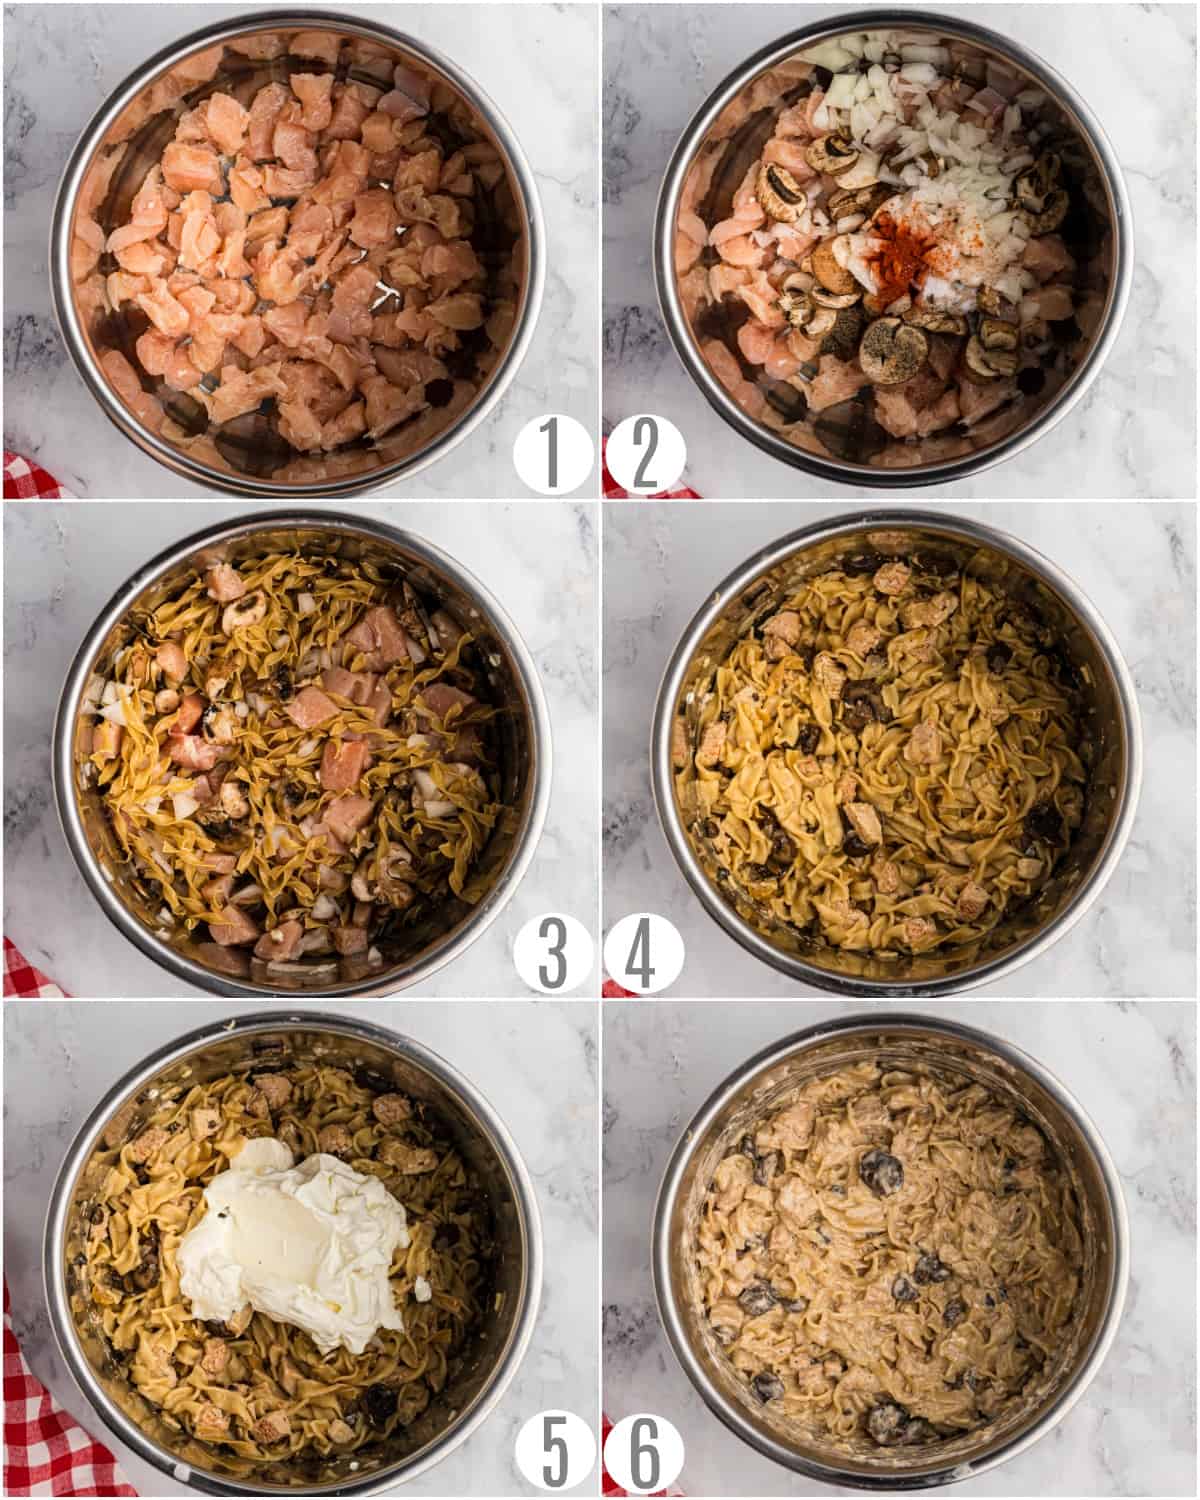 Step by step photos showing how to make chicken stroganoff in the Instant Pot.